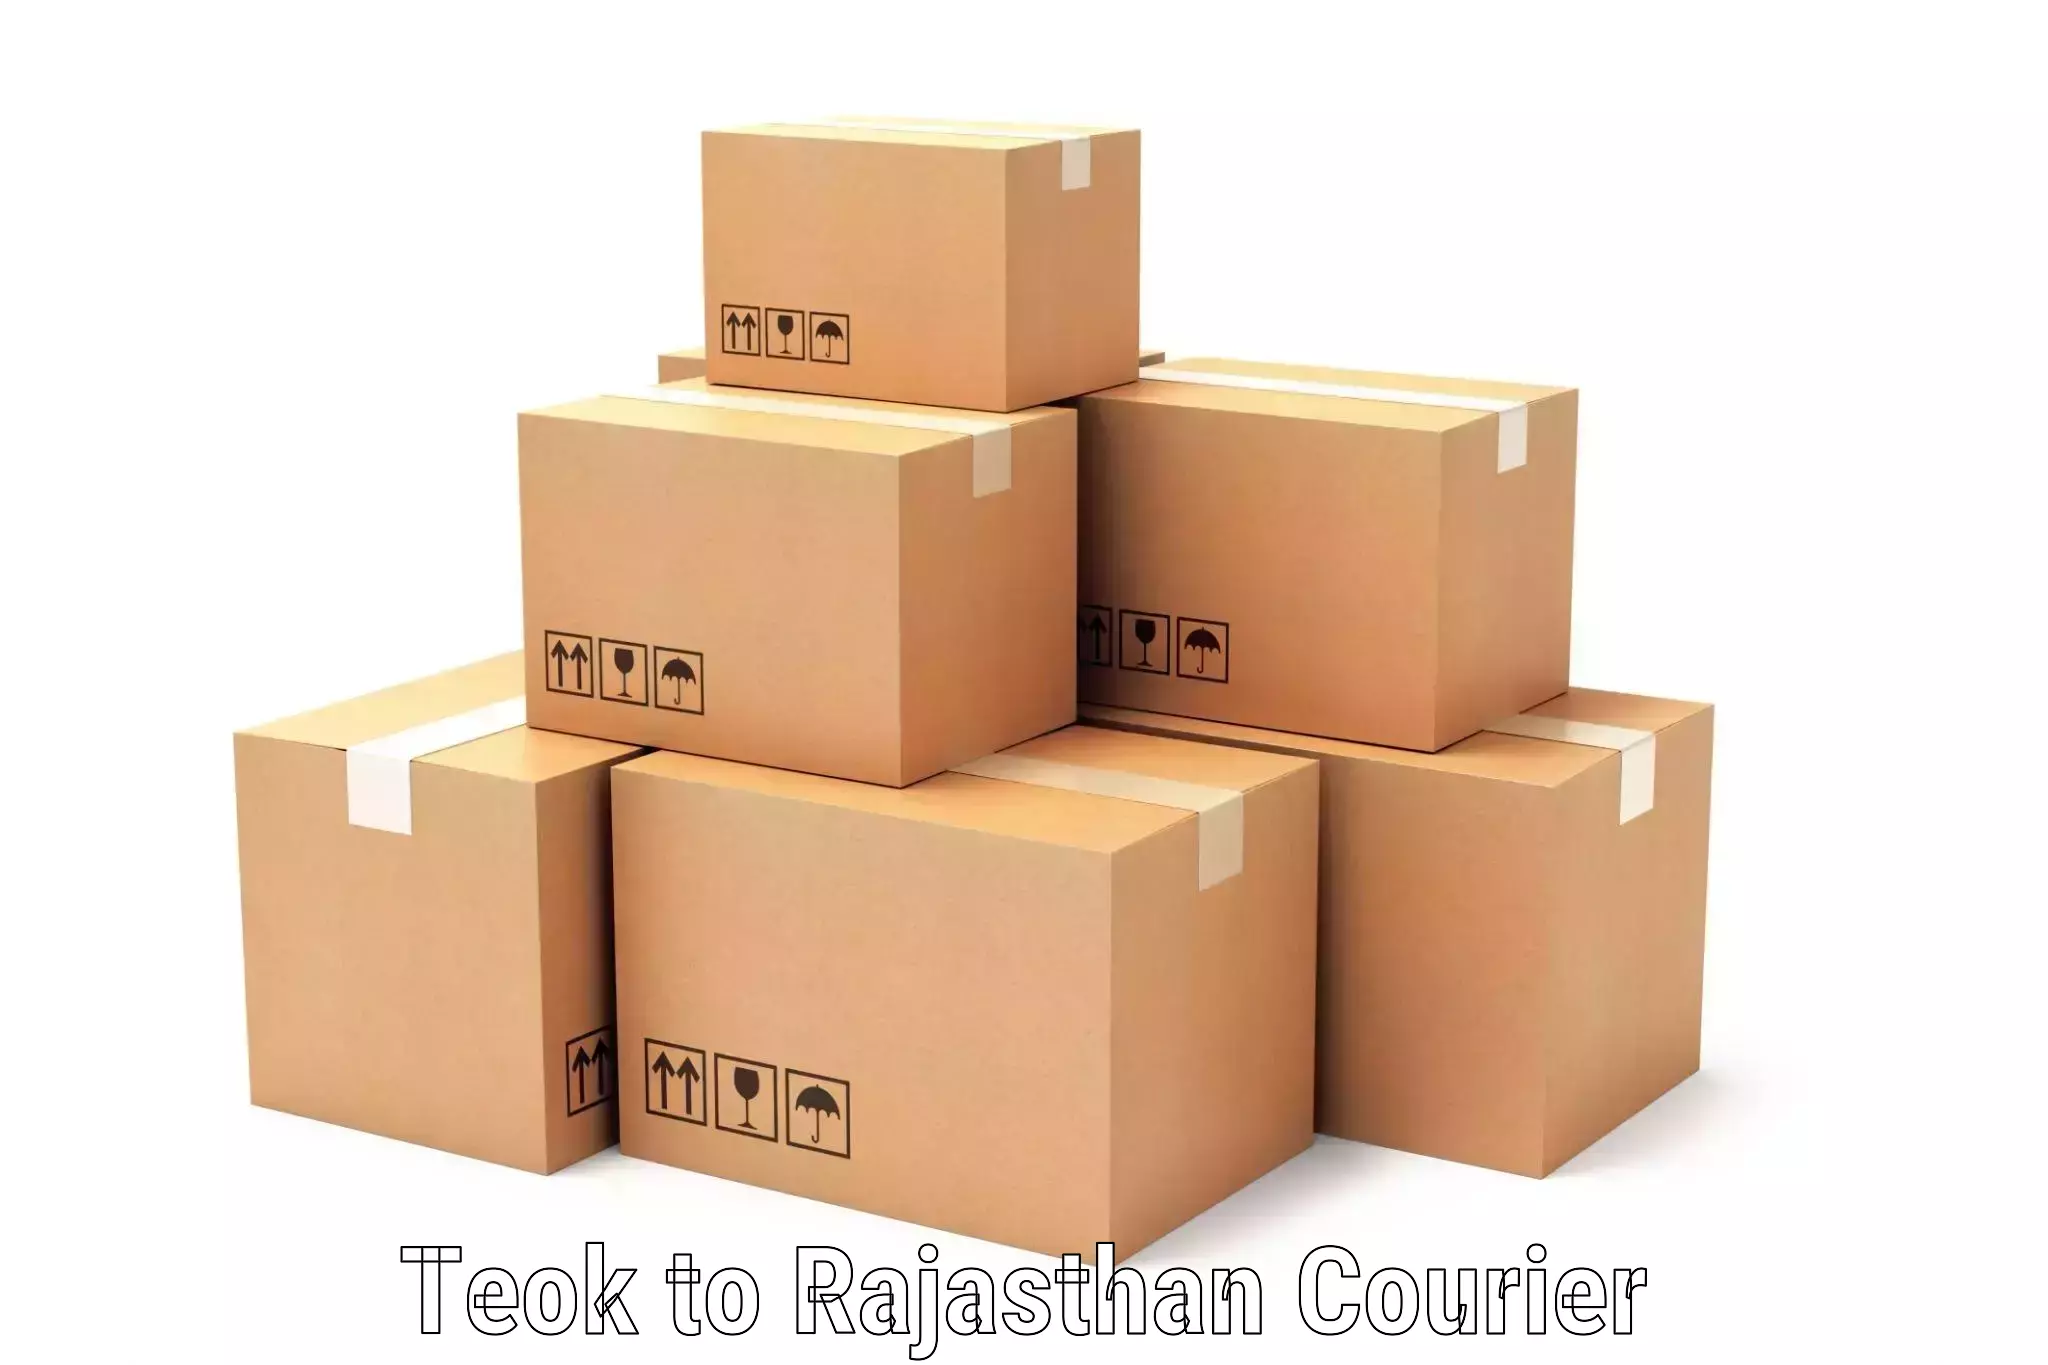 Cost-effective courier options Teok to Udaipur